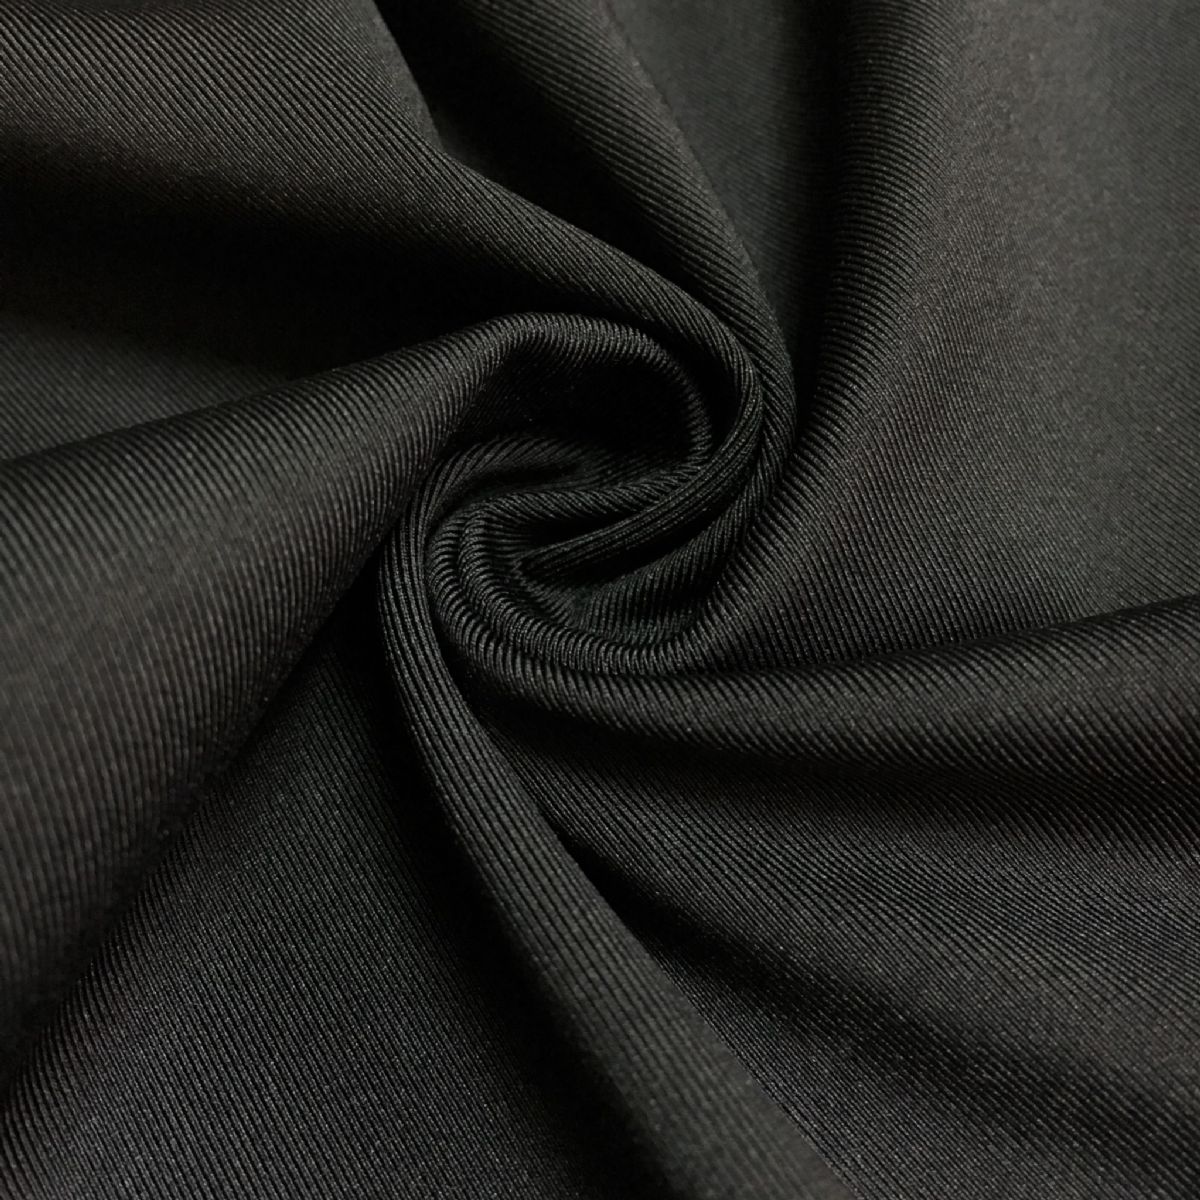 Solid Black 4 Way Stretch Moisture Wicking Athletic Performance Knit Fabric